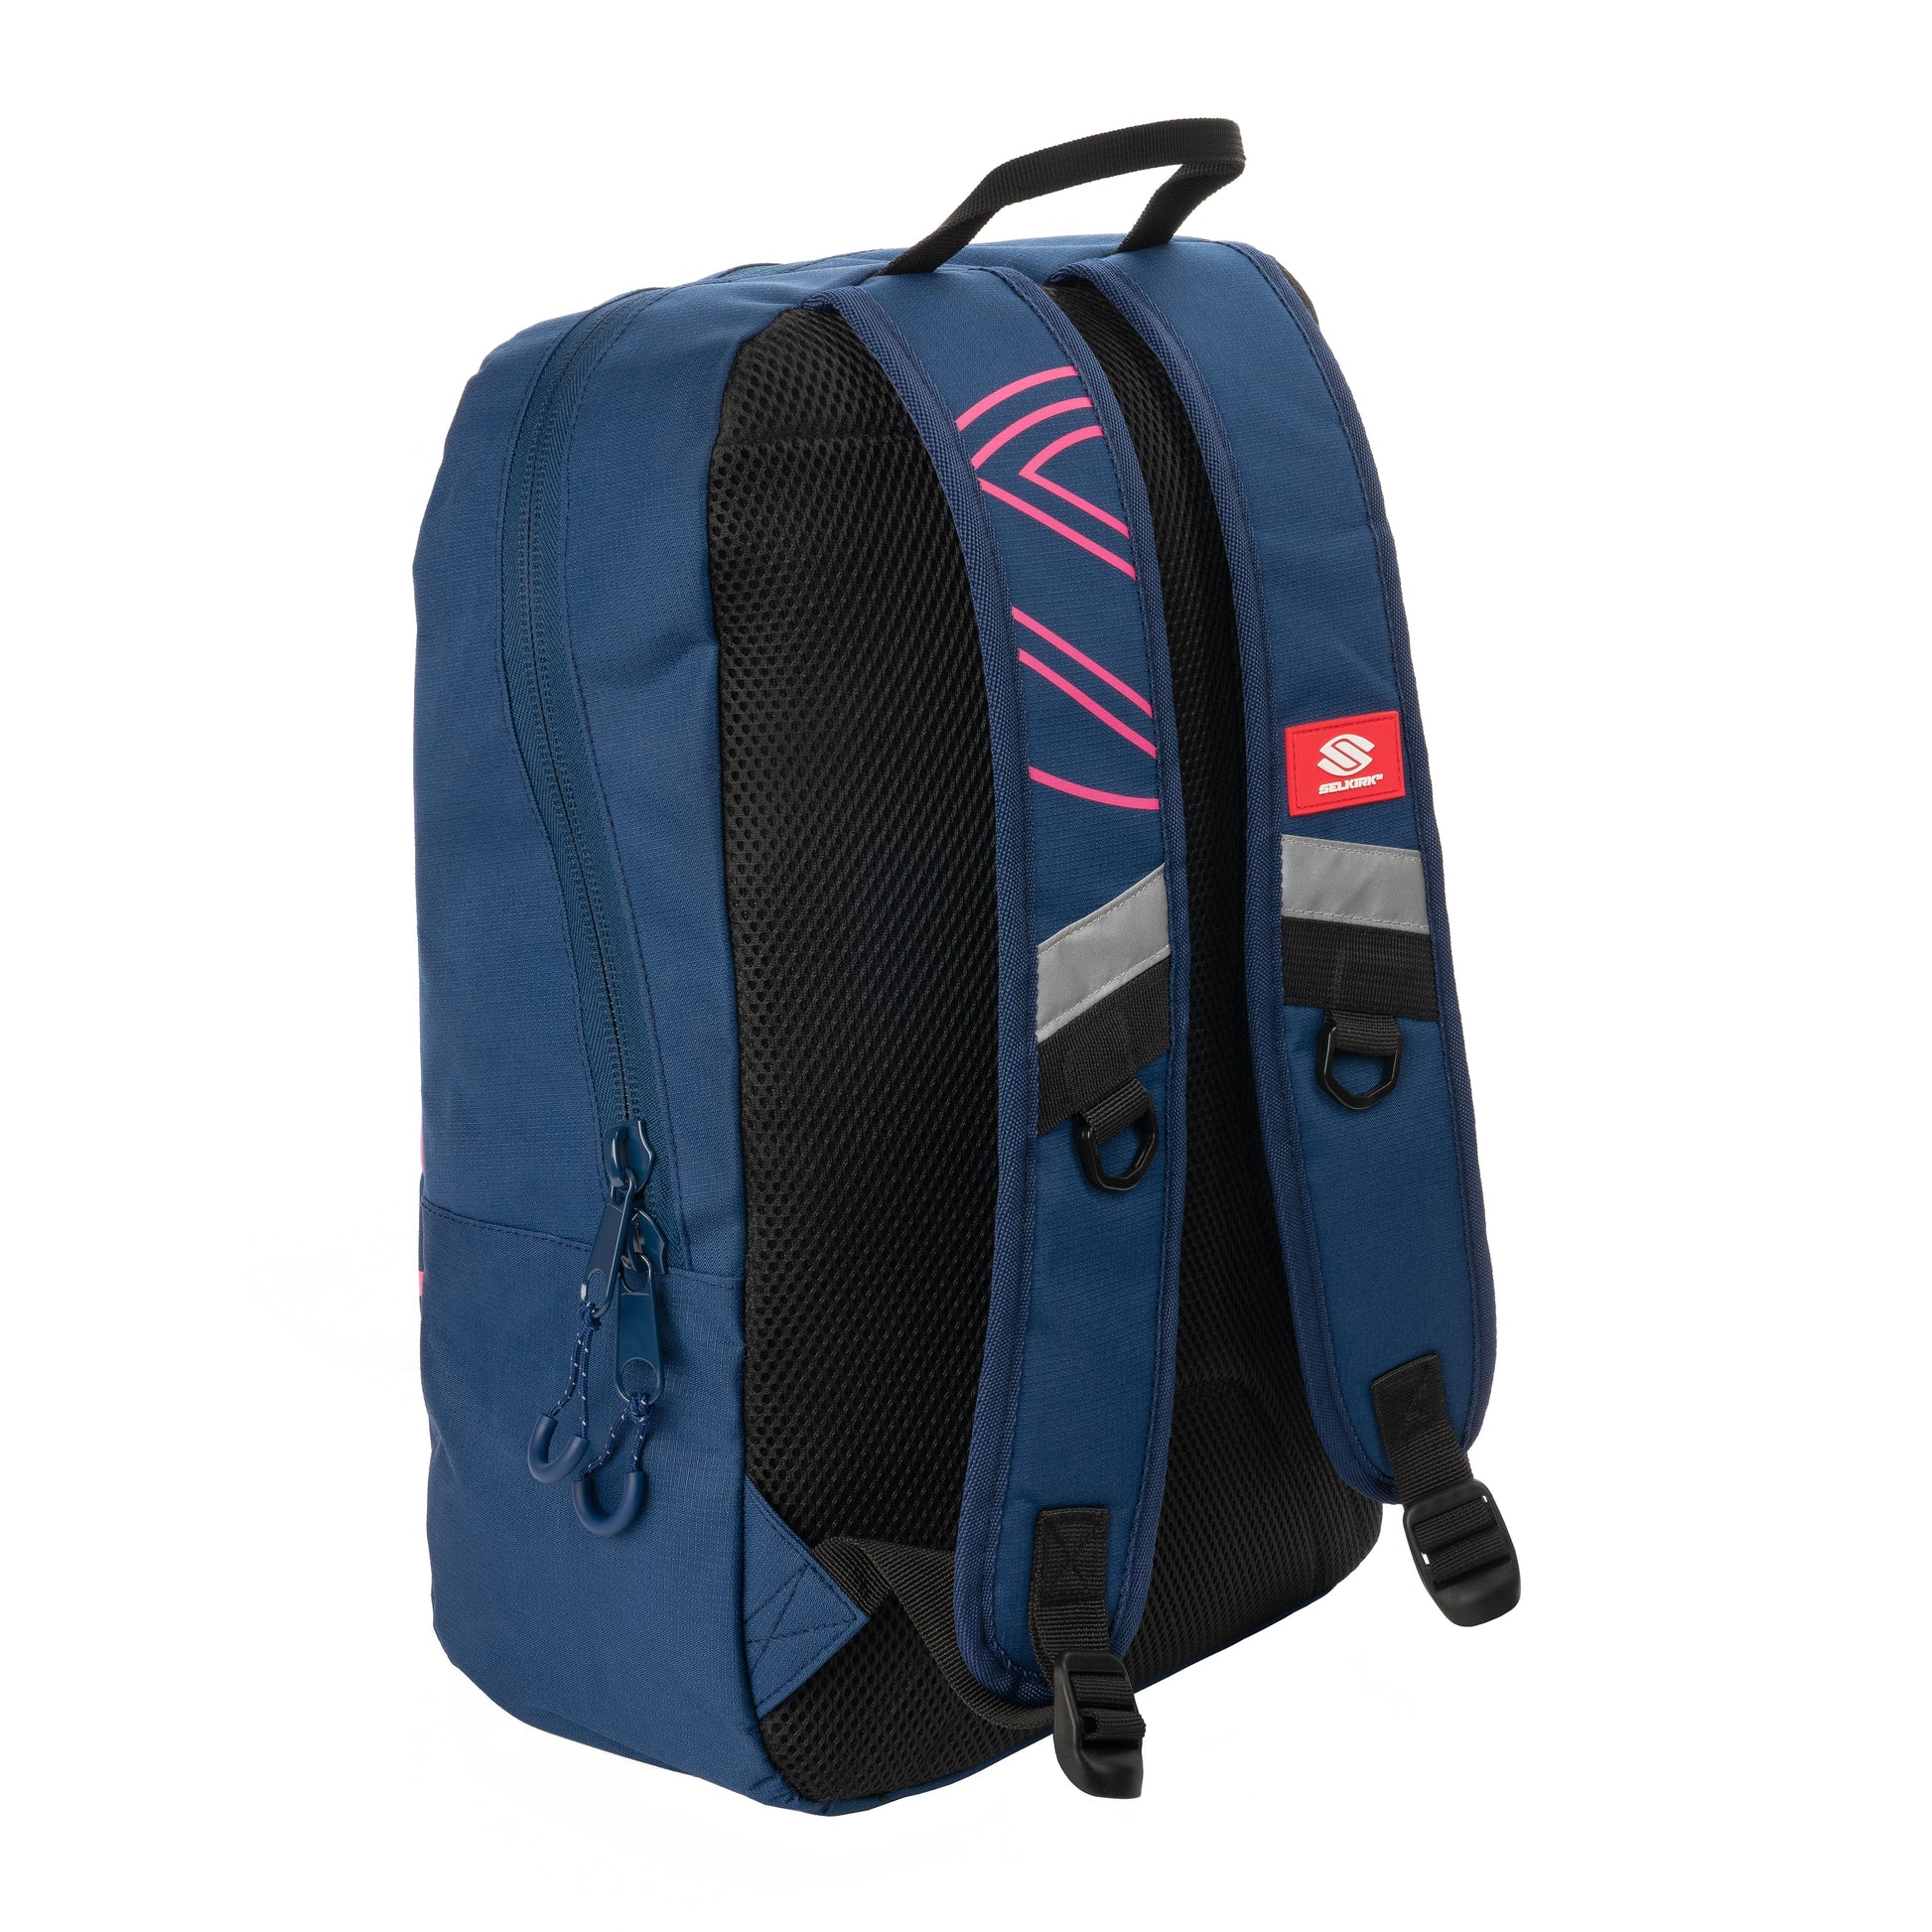 A Selkirk Core Series Day Backpack Pickleball Bag with pink accents.